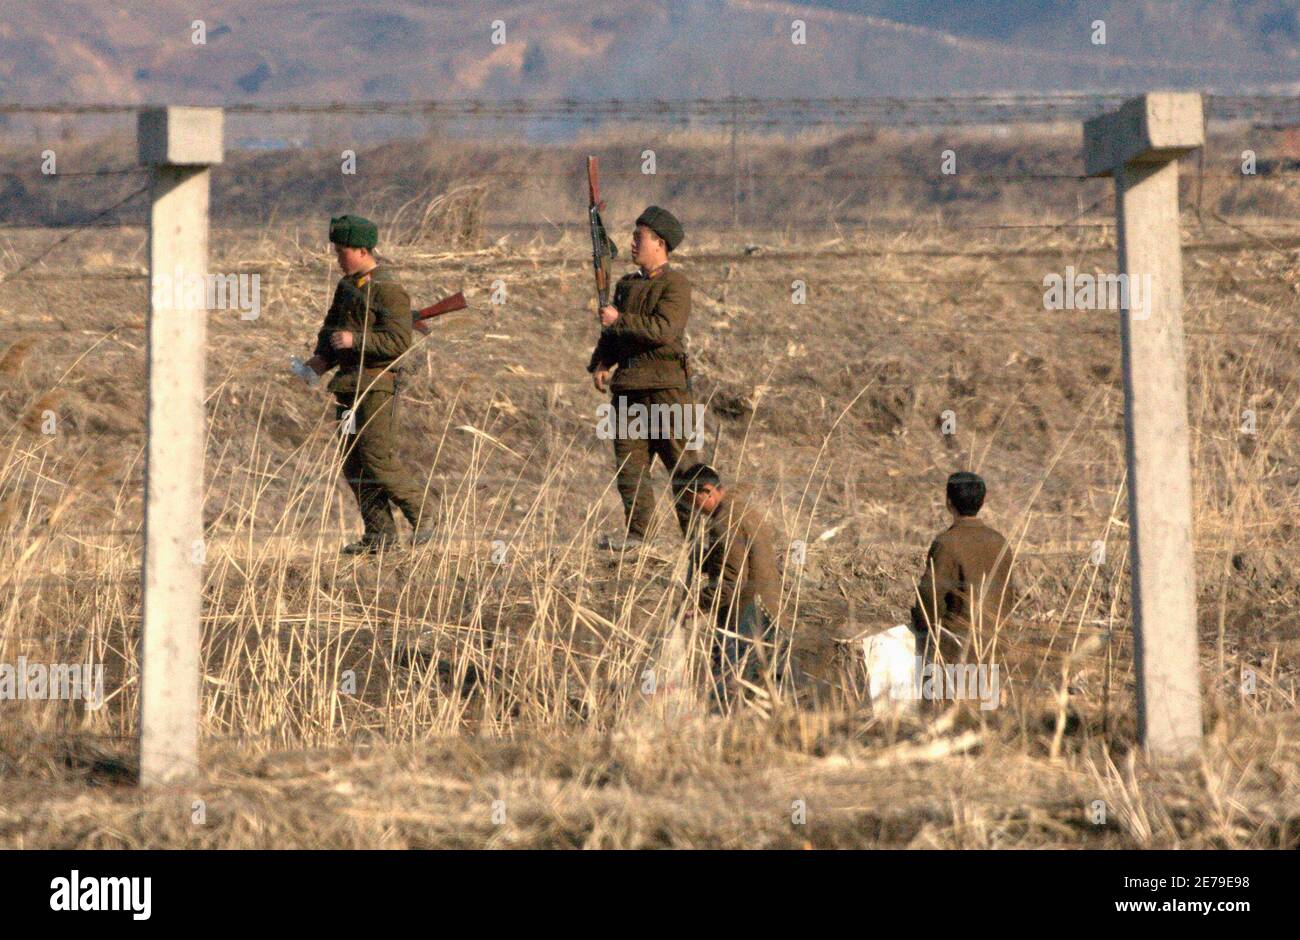 North Korean soldiers guard behind a border fence separating the North Korean town of Sinuiju and the Chinese border city of Dandong, March 23, 2010. North Korea's leader Kim Jong-il may soon visit China, bolstering ties between the two neighbours while regional powers and Washington seek to draw Pyongyang back to nuclear disarmament talks. REUTERS/Jacky Chen (NORTH KOREA - Tags: POLITICS MILITARY) Stock Photo